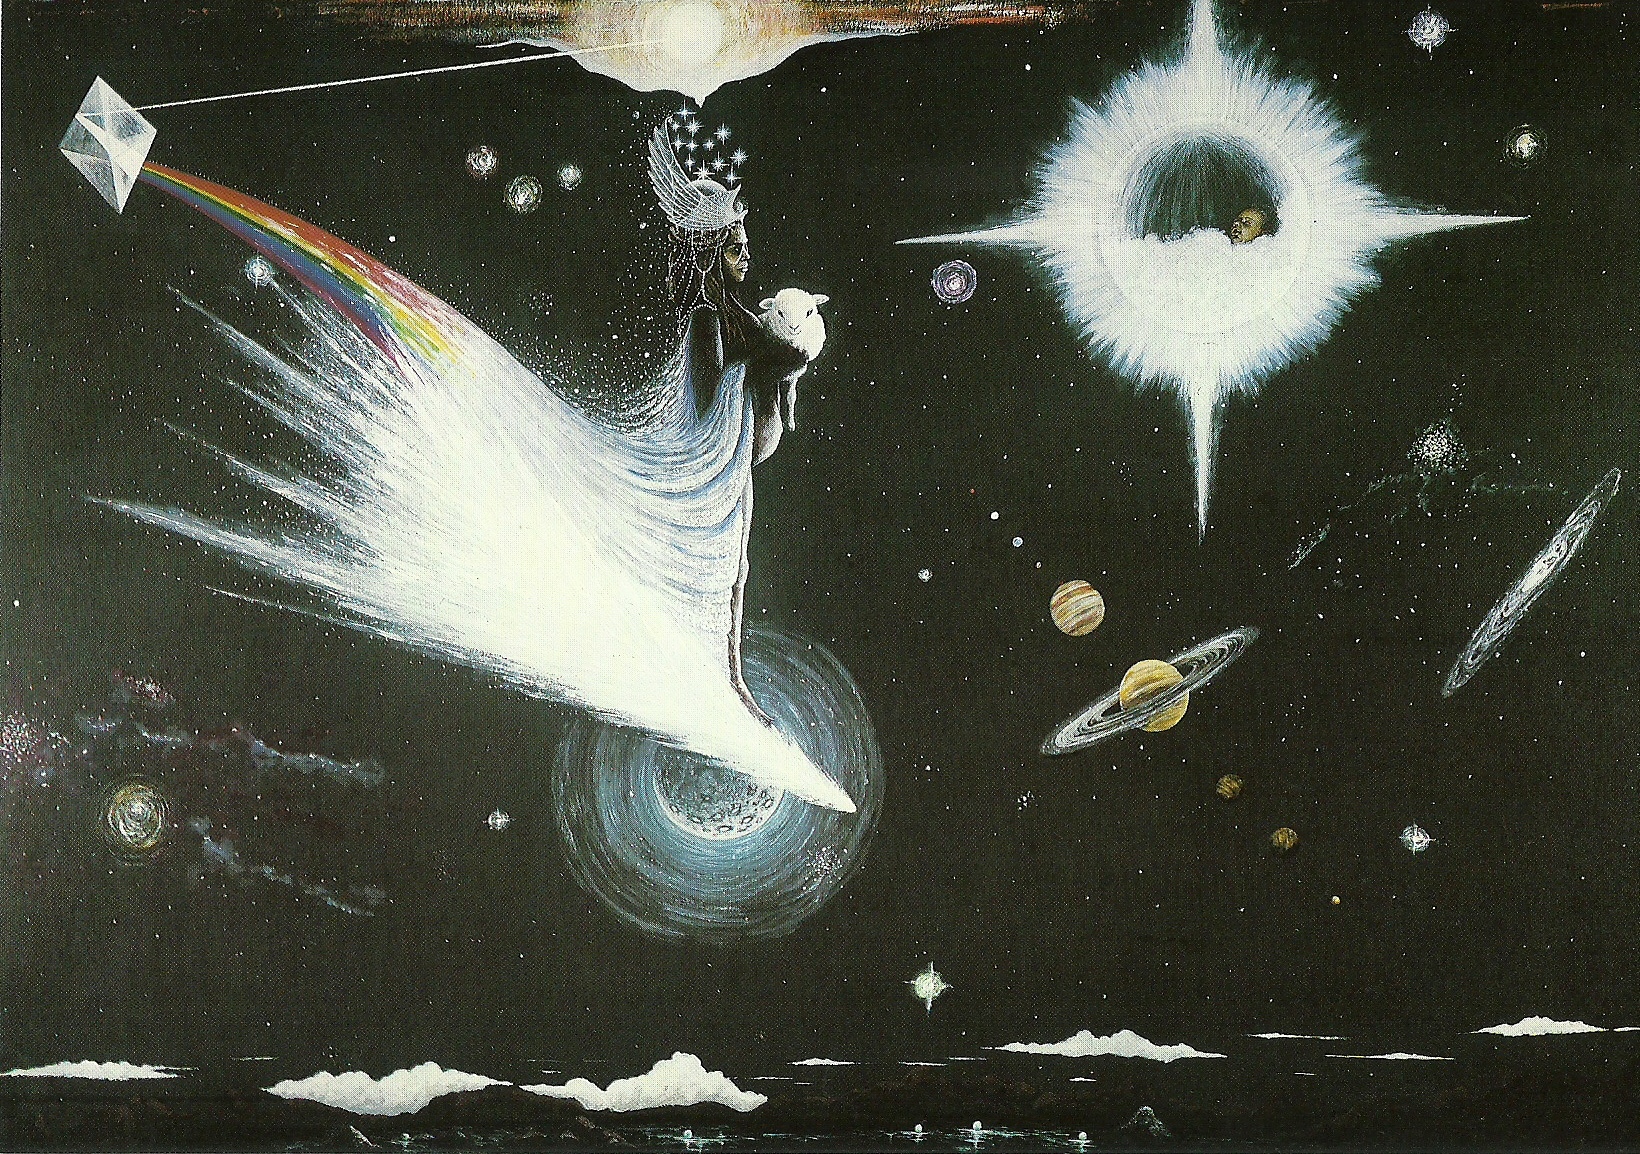 A Rastafari queen floats in space holding a lamb in her arms. In the background are various celestial objects and a baby inside a star.